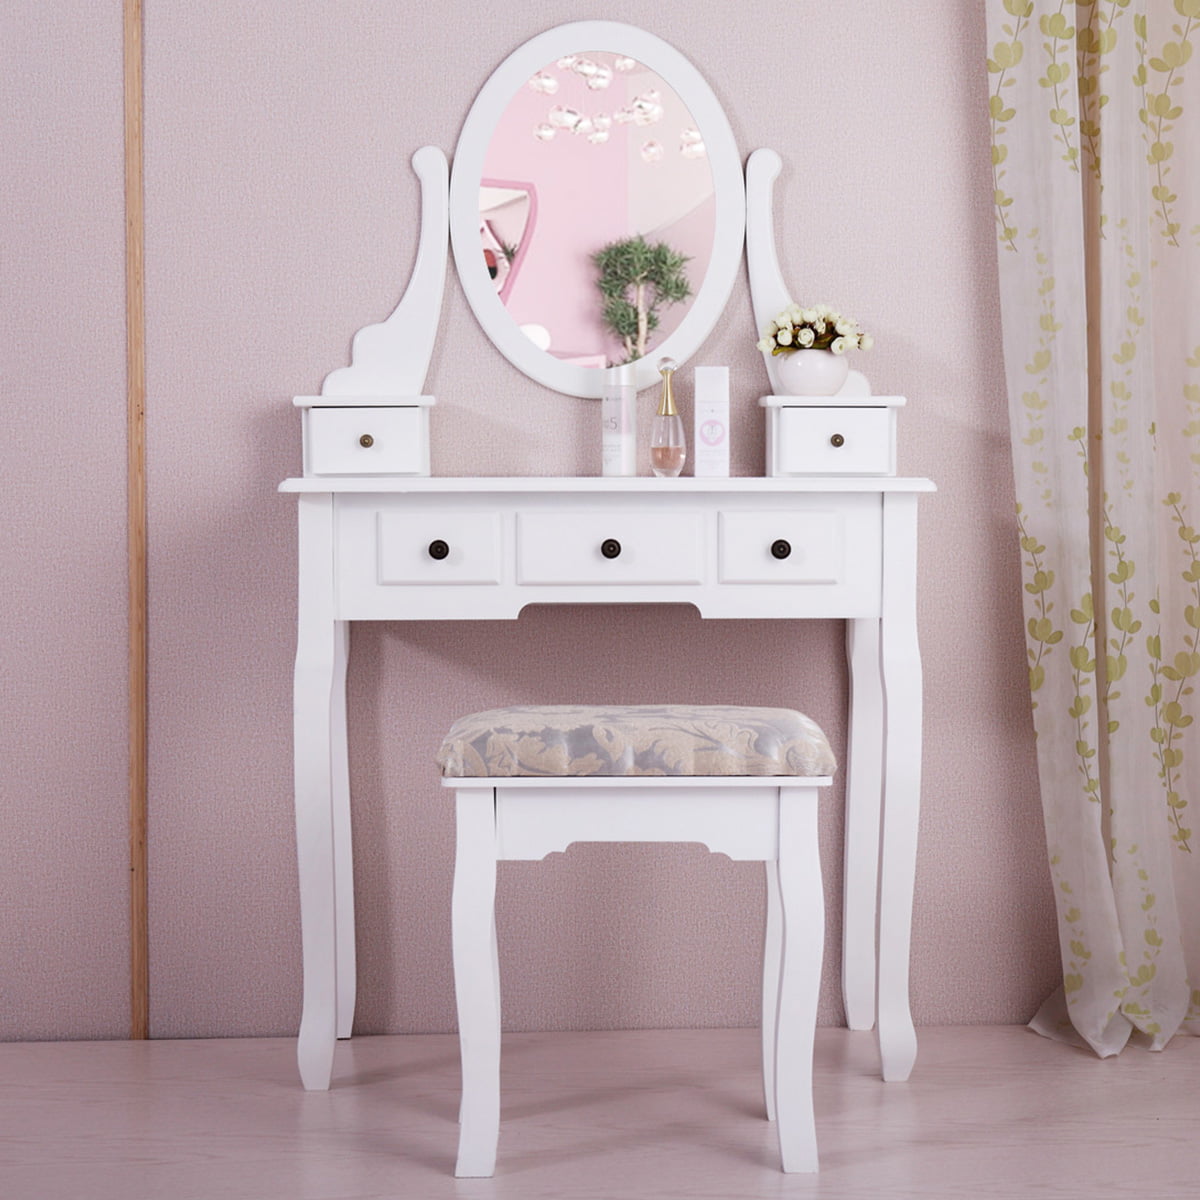 Details about   White Vanity Makeup Dressing Table Set with 3 Drawer Mirror & Stool Jewelry Desk 